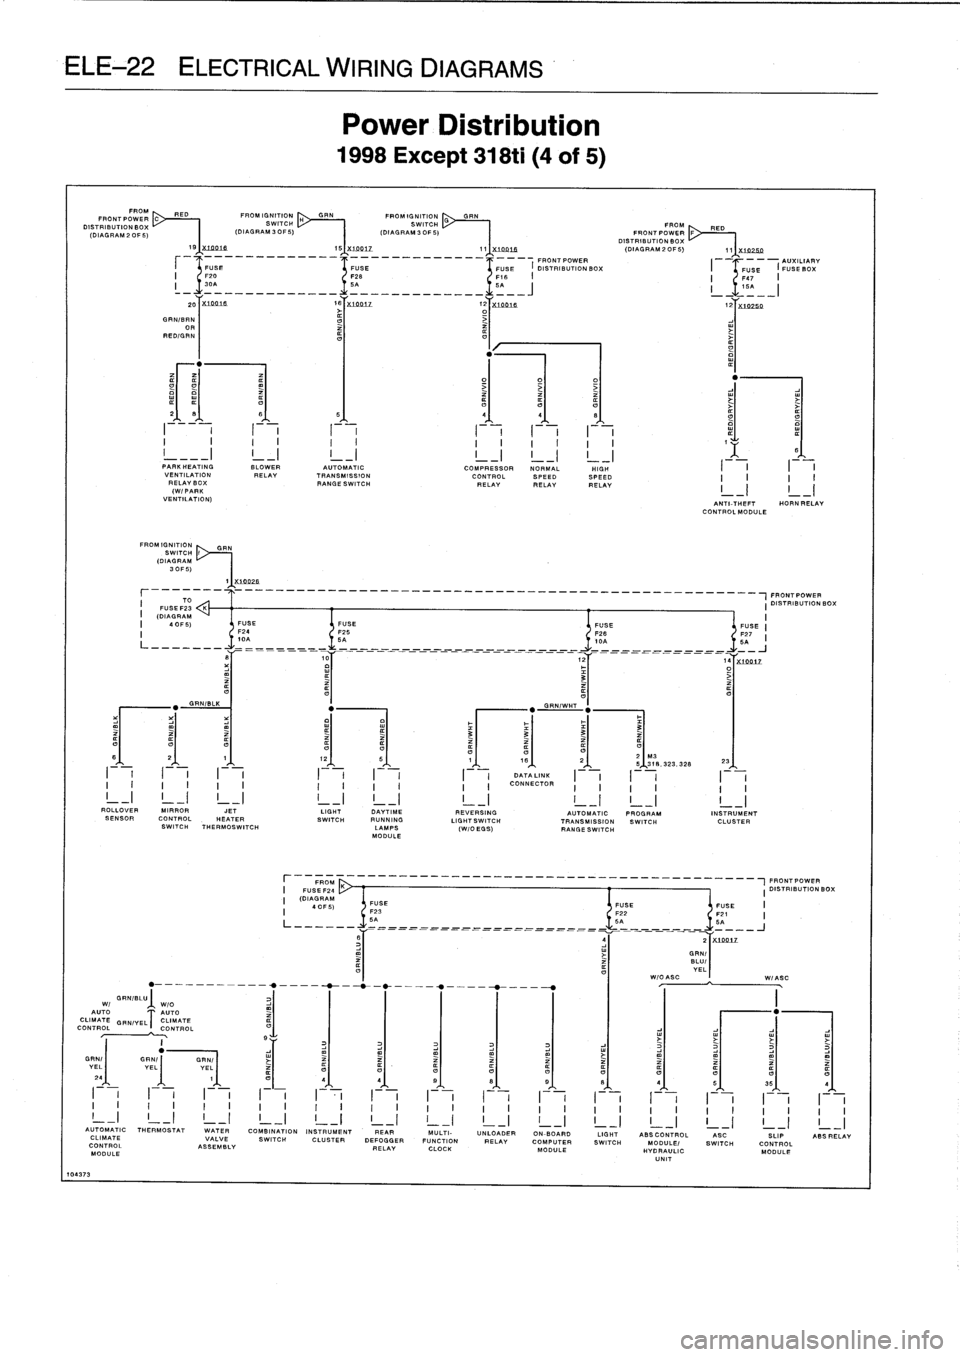 BMW 318i 1997 E36 Owners Manual 
ELE-22

ELECTRICAL
WIRING
DIAGRAMS

GRNIBLU
Wl

WIO

AUTO

AUTO

CLIMATE

GEN/YELT
CLIMATE

CONTROL

CONTROL

10437
3

FP

OM~
	

PED
FRONTPOWER
DISTRIBUTION

BOY%

(DIAGRAM

2
OF
5)

S

FROMIGNITION